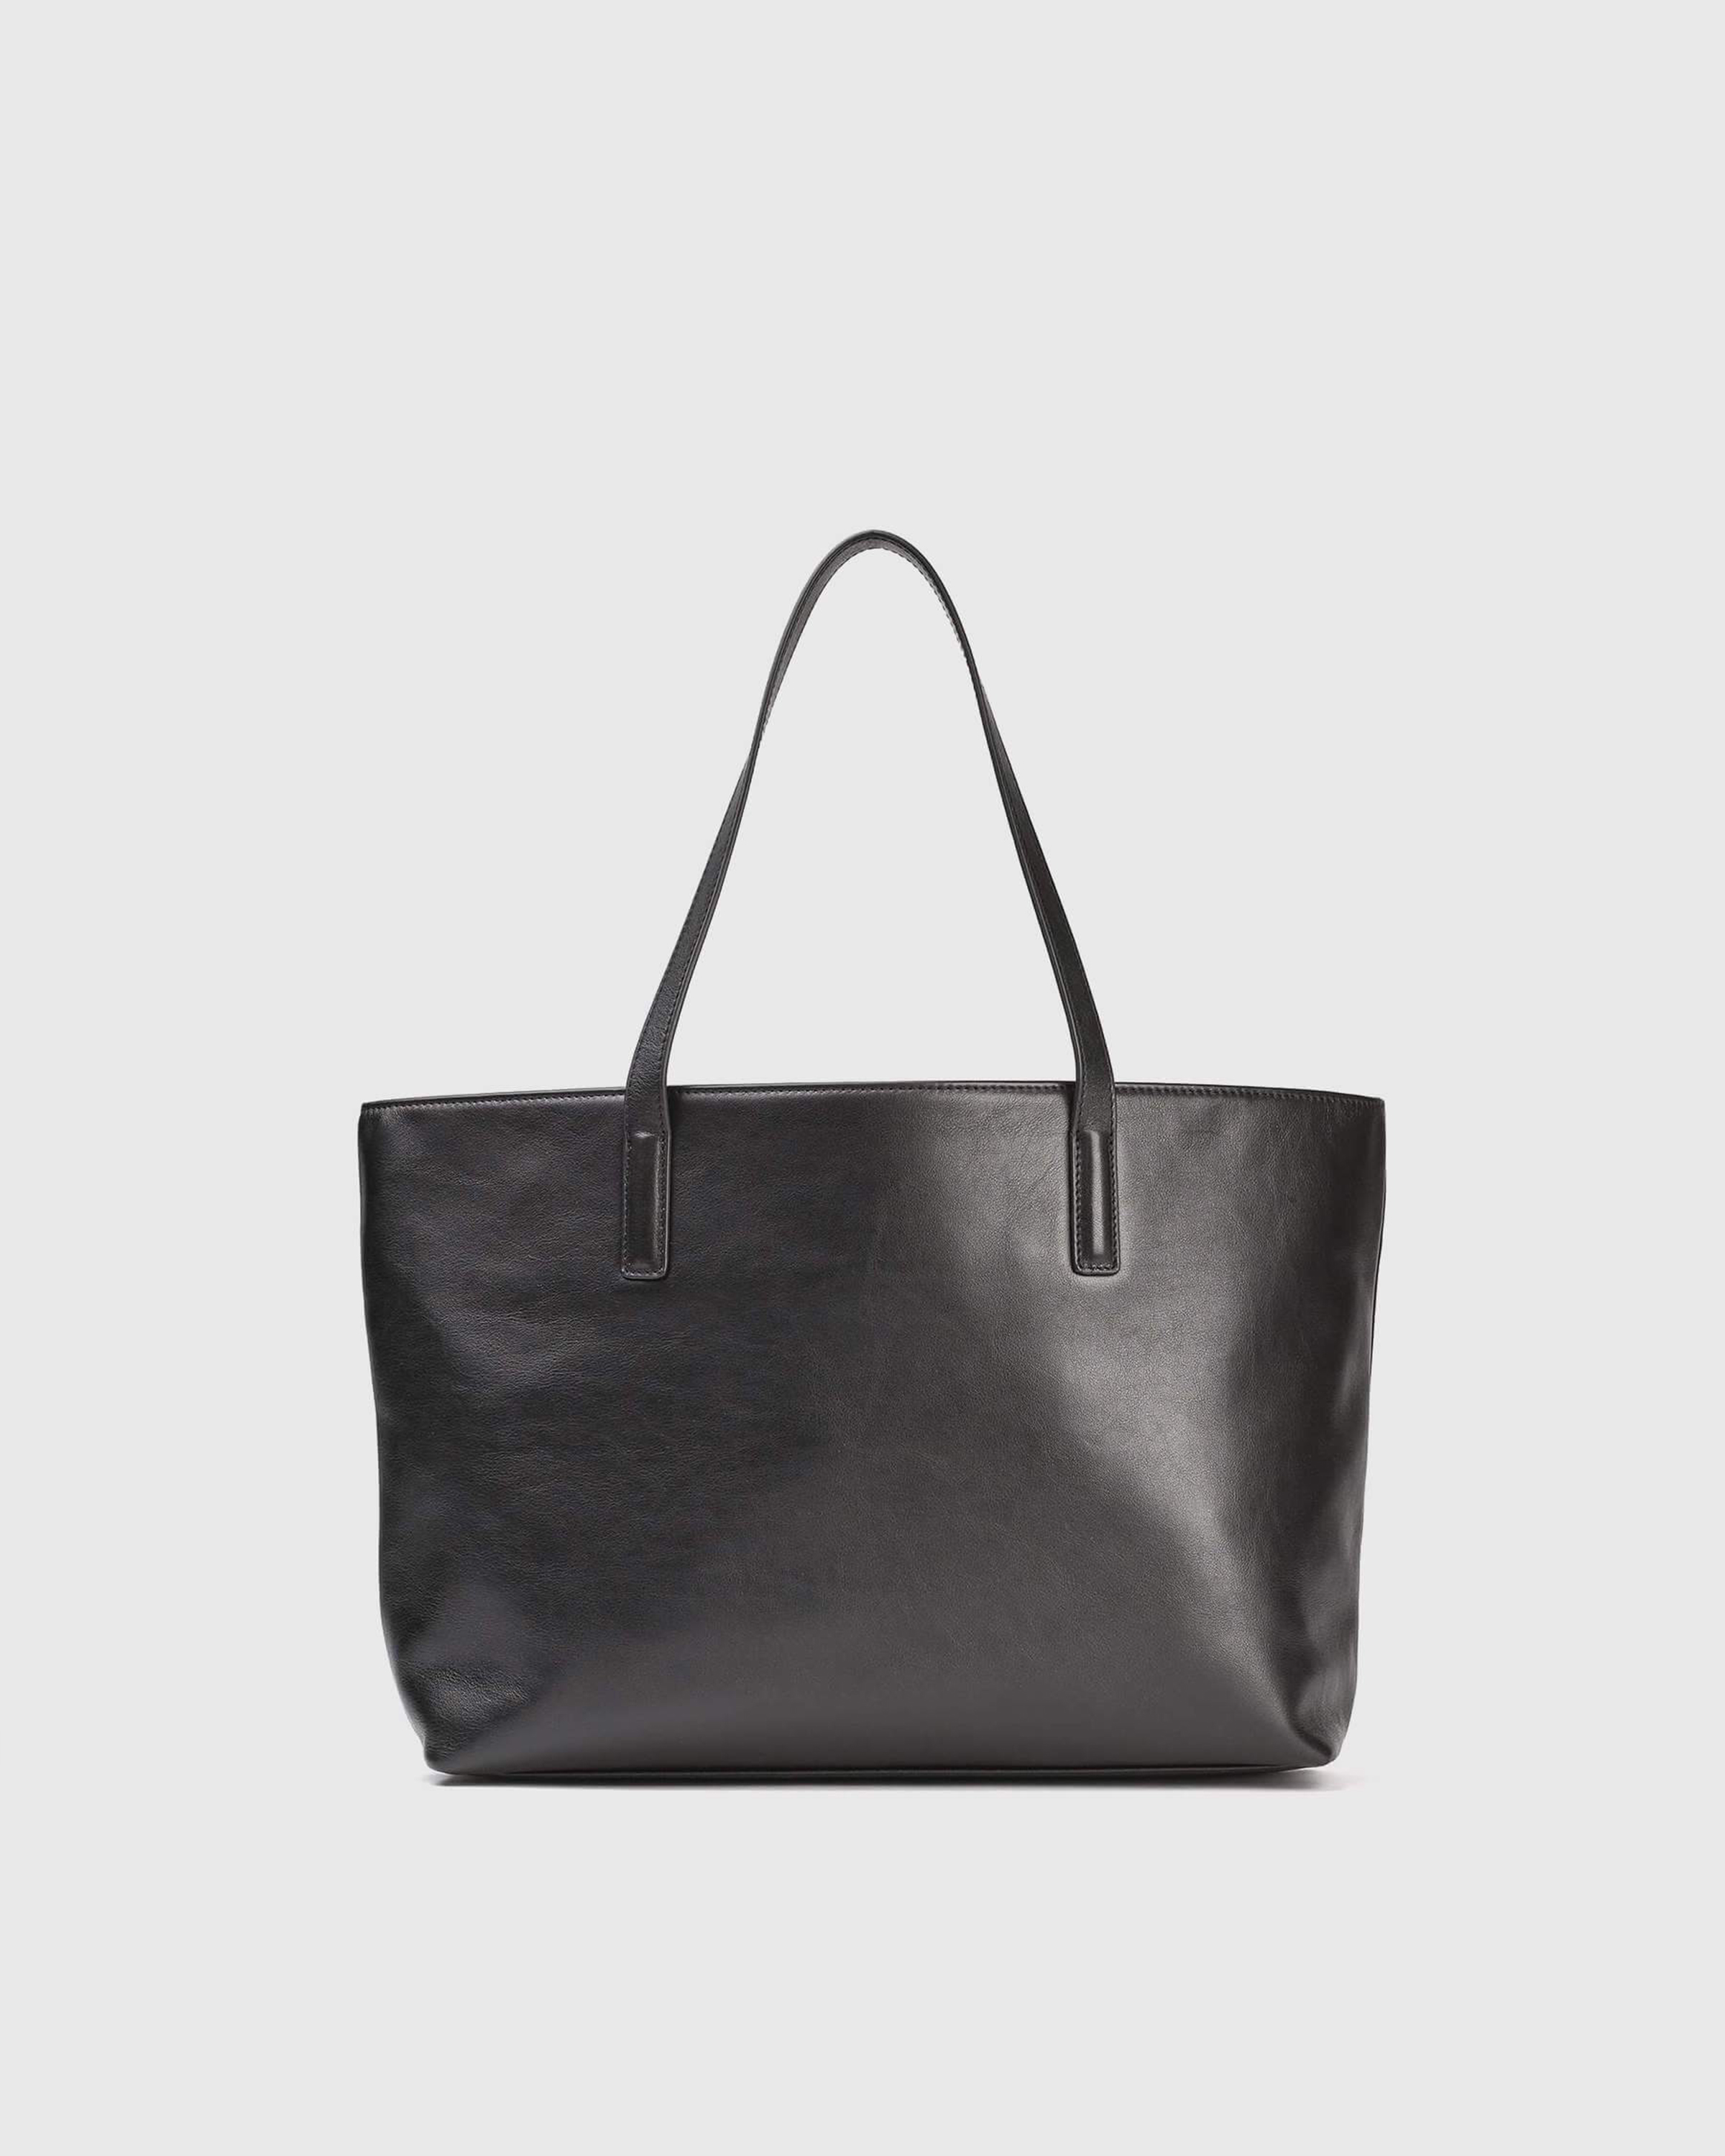 17 Chic Tote Bags for Work - FROM LUXE WITH LOVE